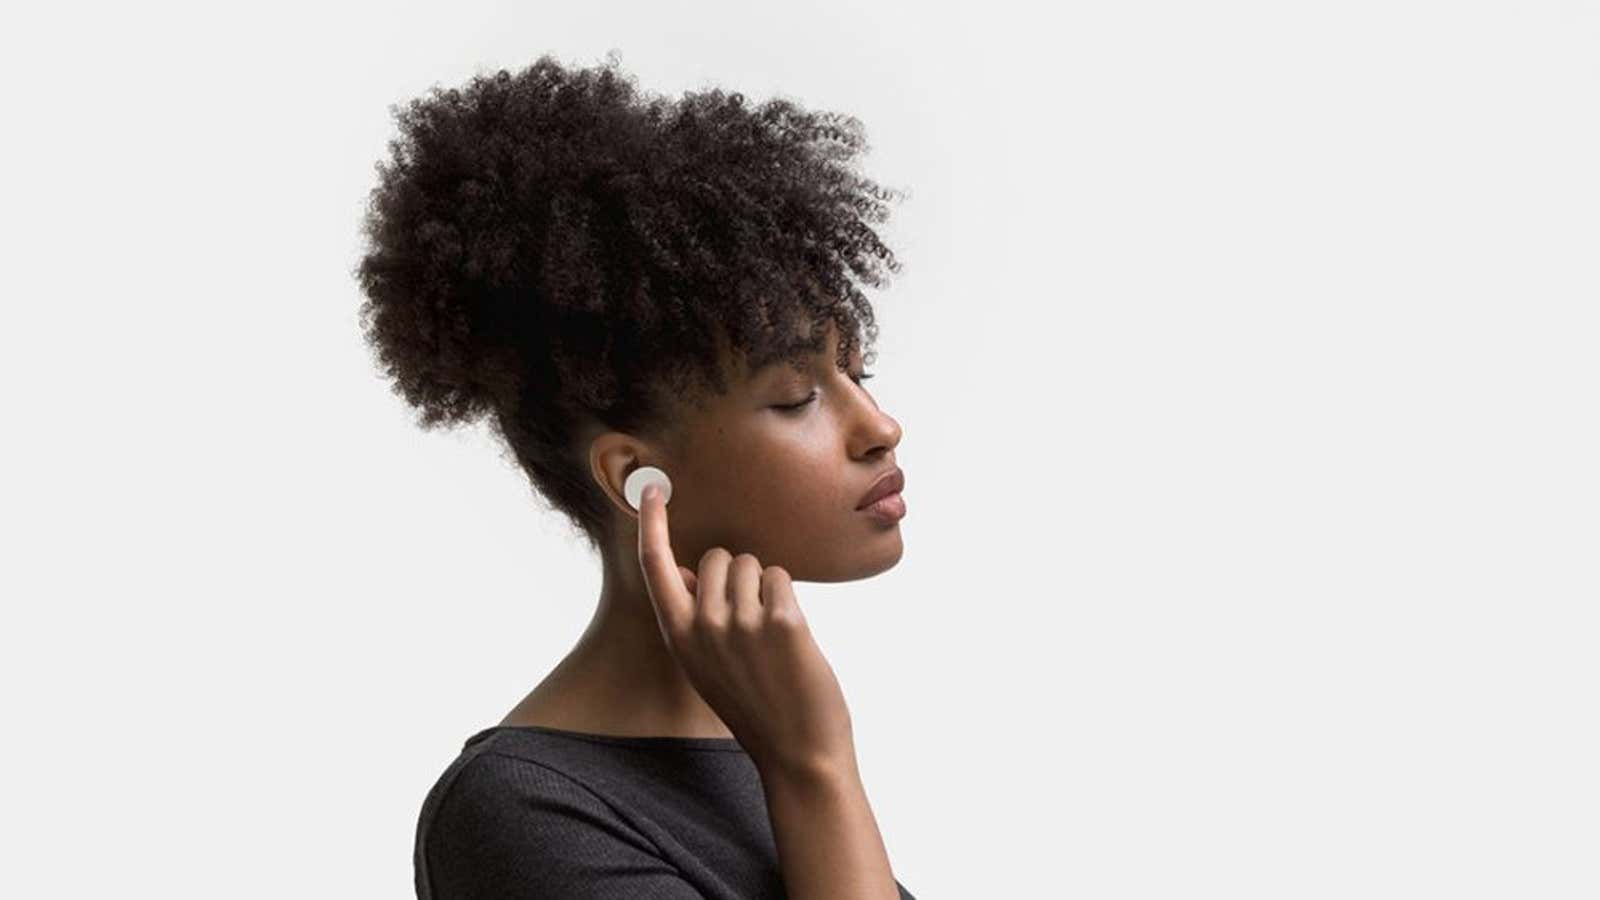 Apple’s AirPods have little to fear from its rivals